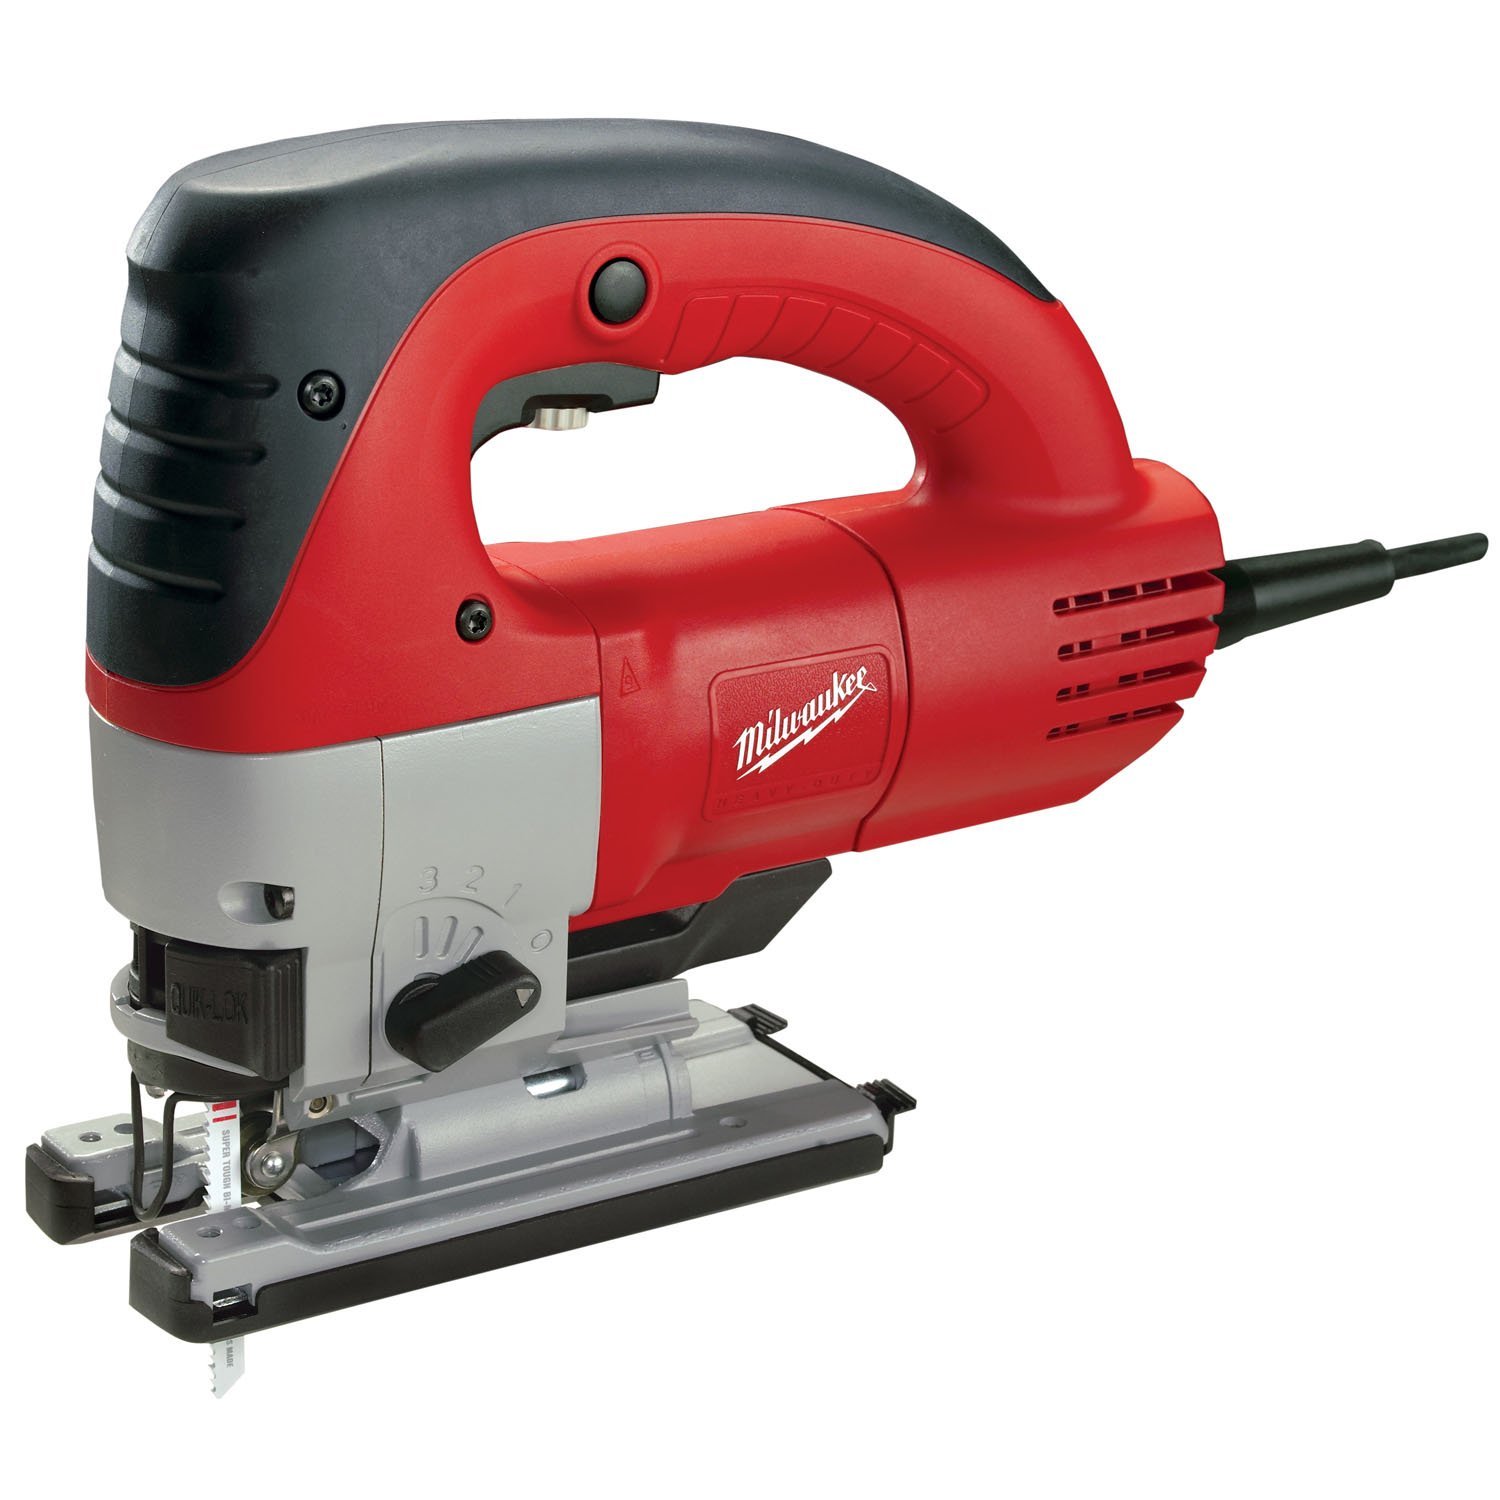 DOUBLE INSULATED VARIABLE SPEED ORBITAL JIG SAW 120 VAC 6.5 A 1 IN STROKE